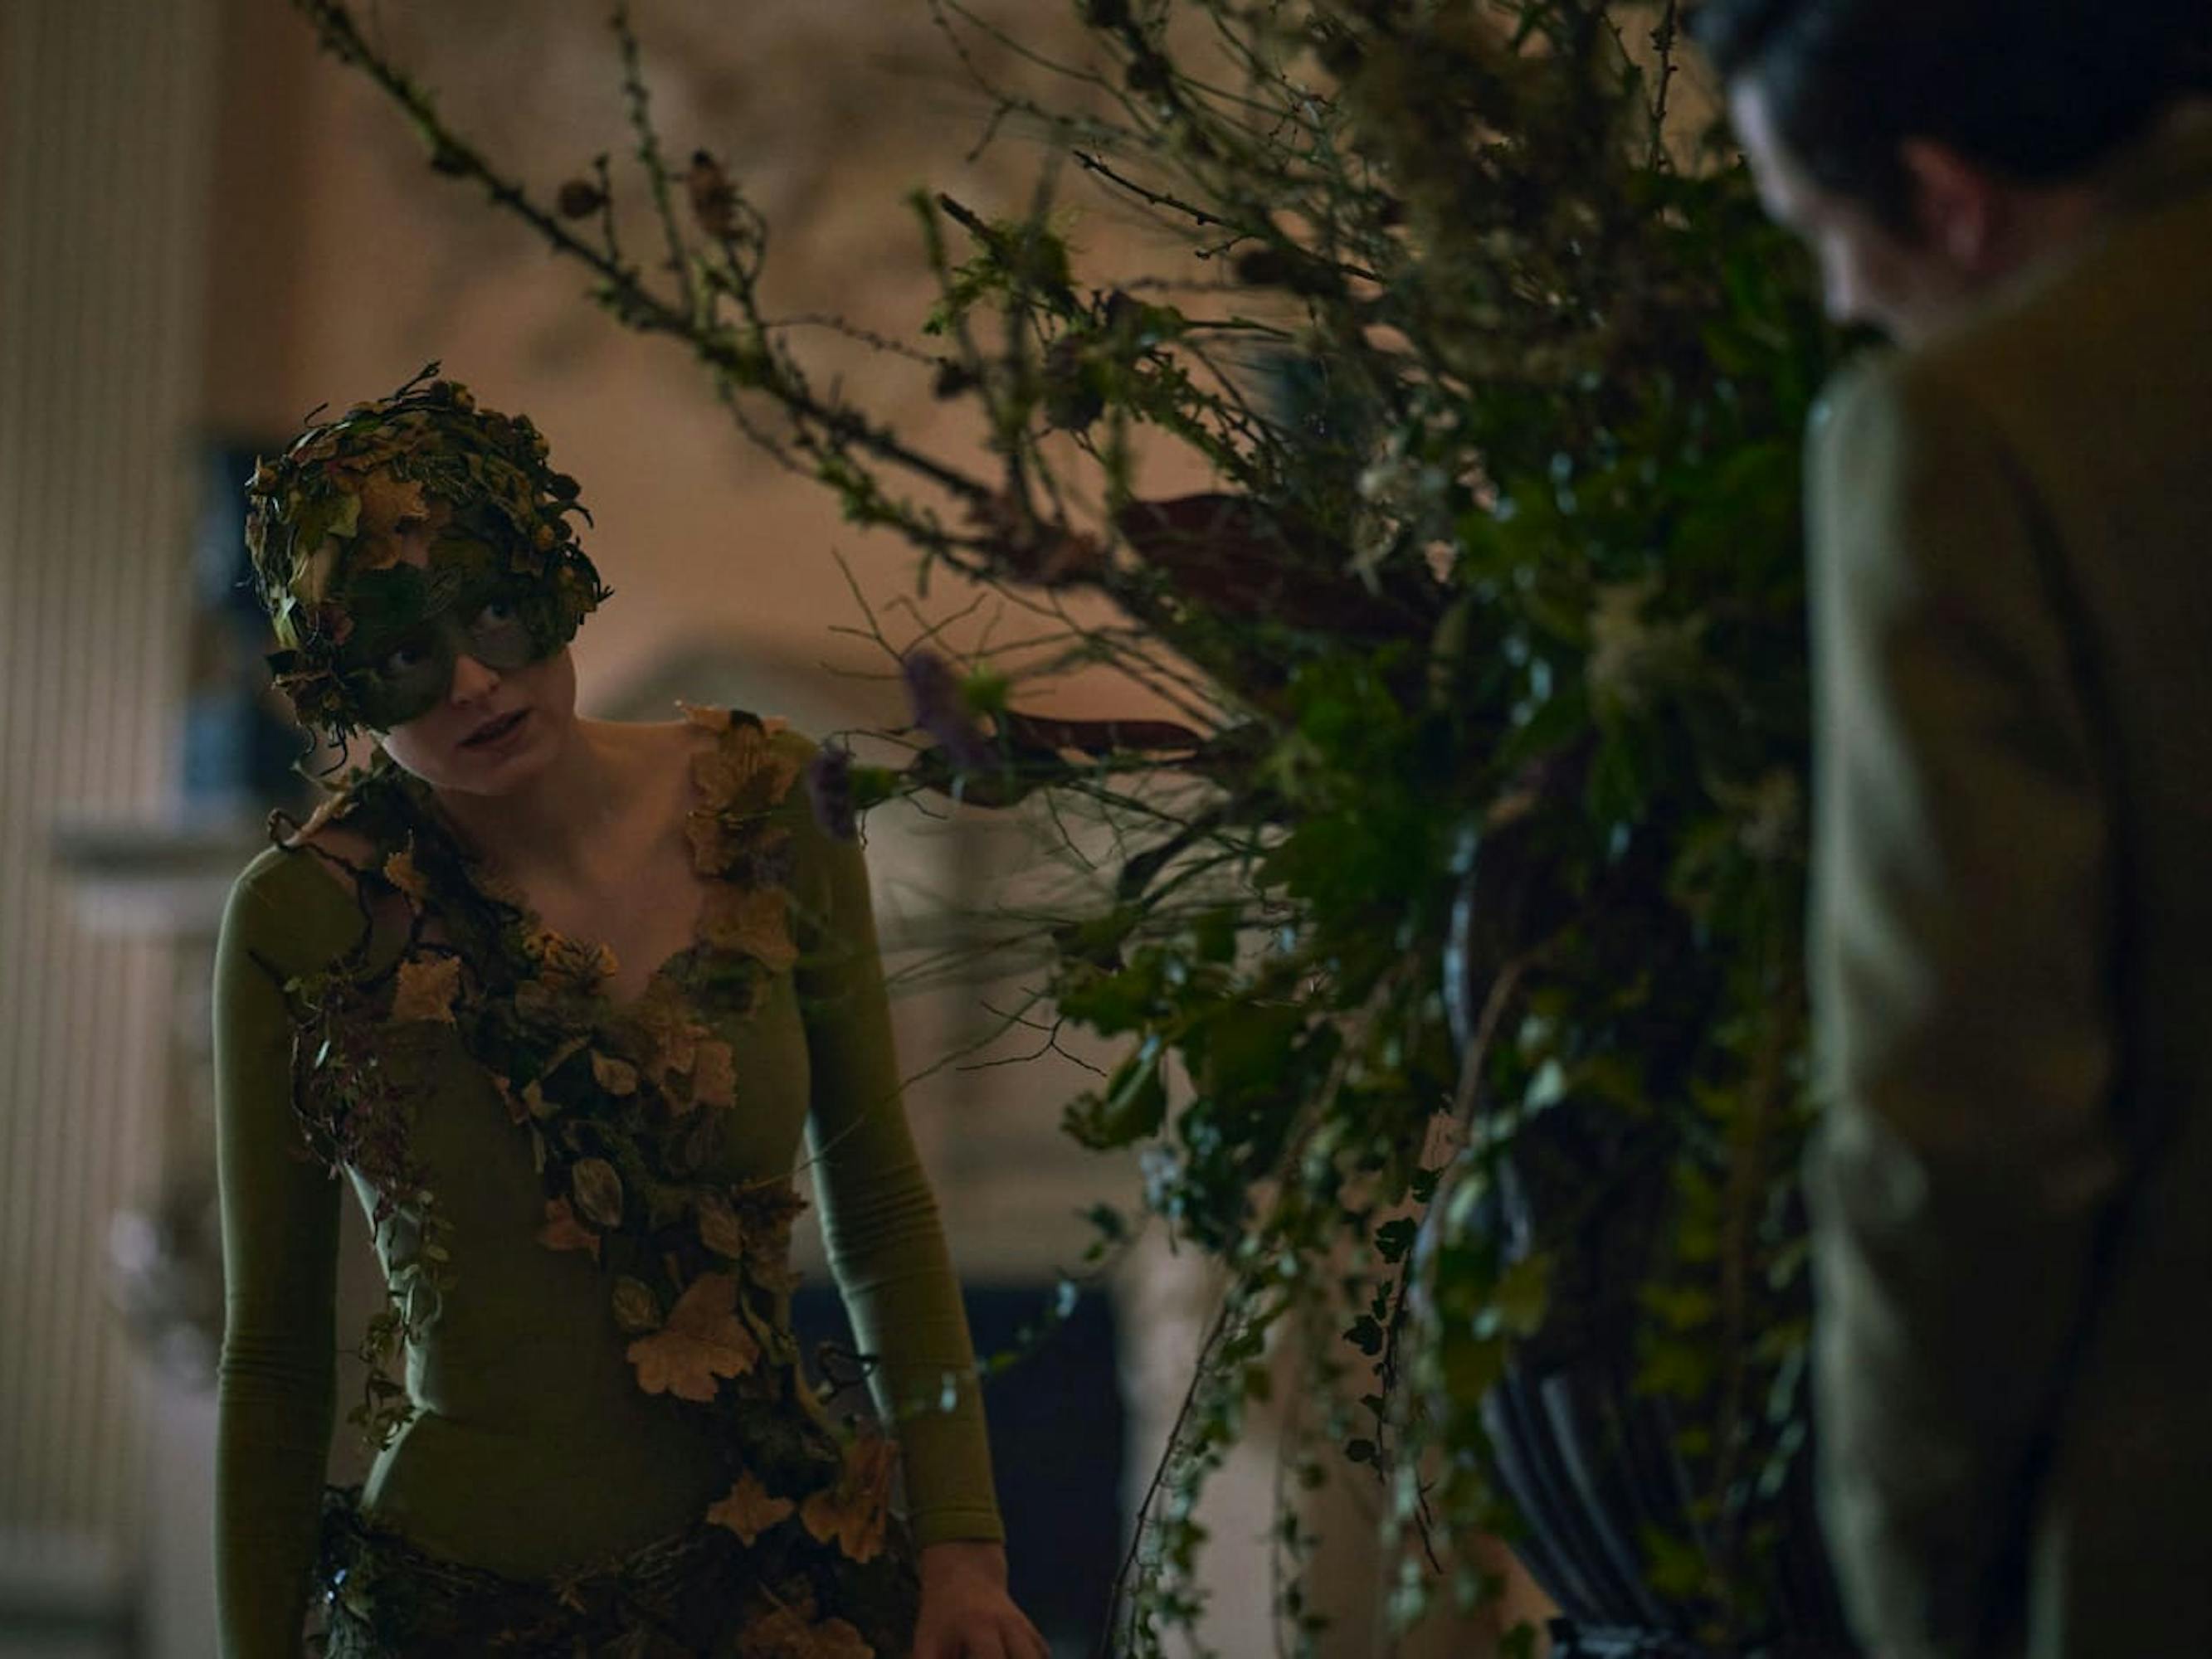 Diana (Emma Corrin) creepes behind a large planter, dressed as a tree from A Midsummer Night’s Dream. Josh’s figure appears on the right side.